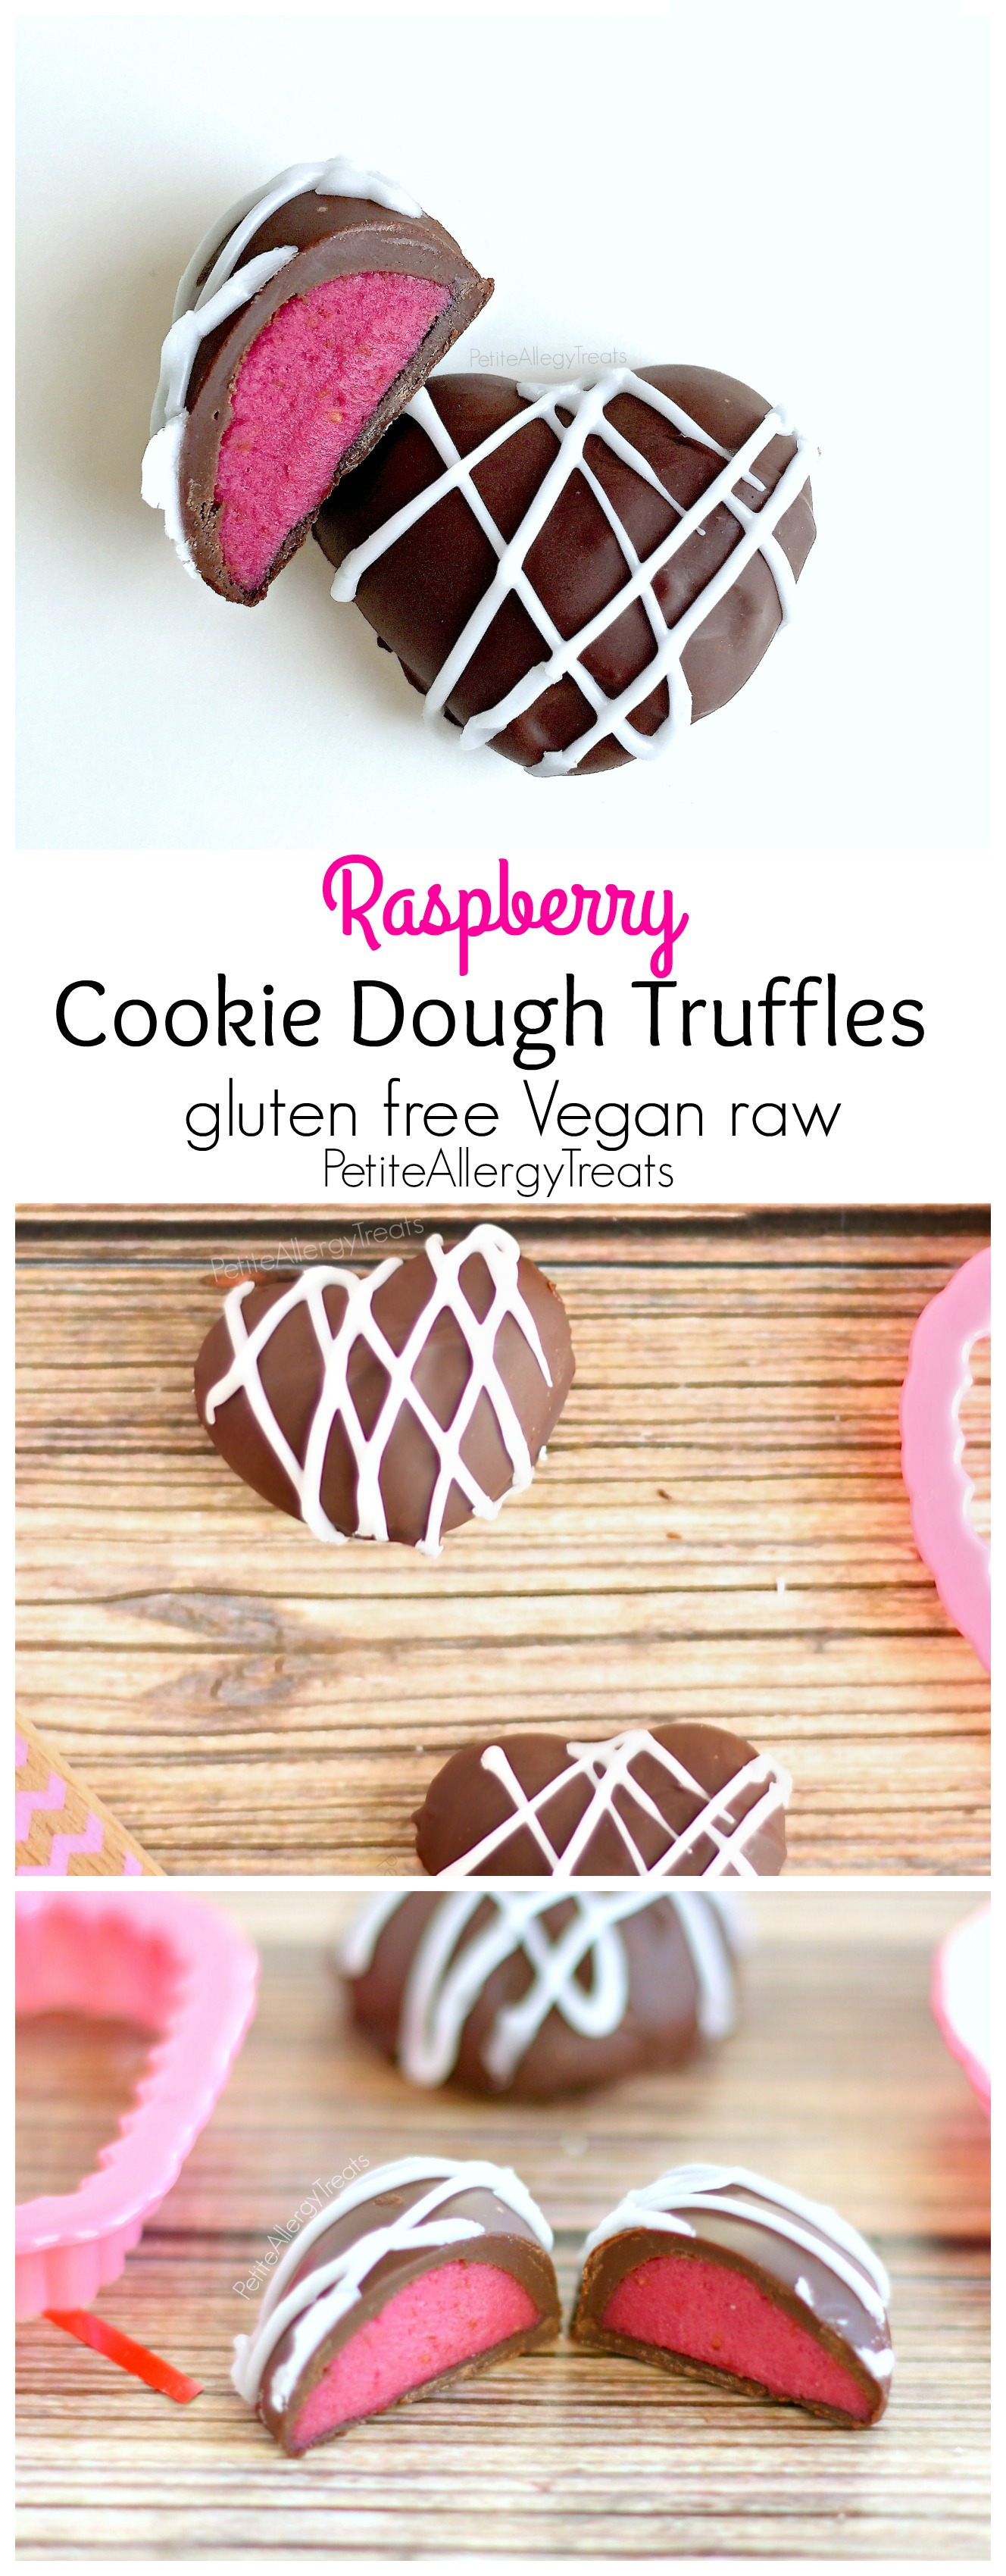 Chocolate Raspberry Cookie Dough Truffles (gluten free Vegan raw) Chocolate covered raspberry flavored cookie dough. A no bake natural red treat. 